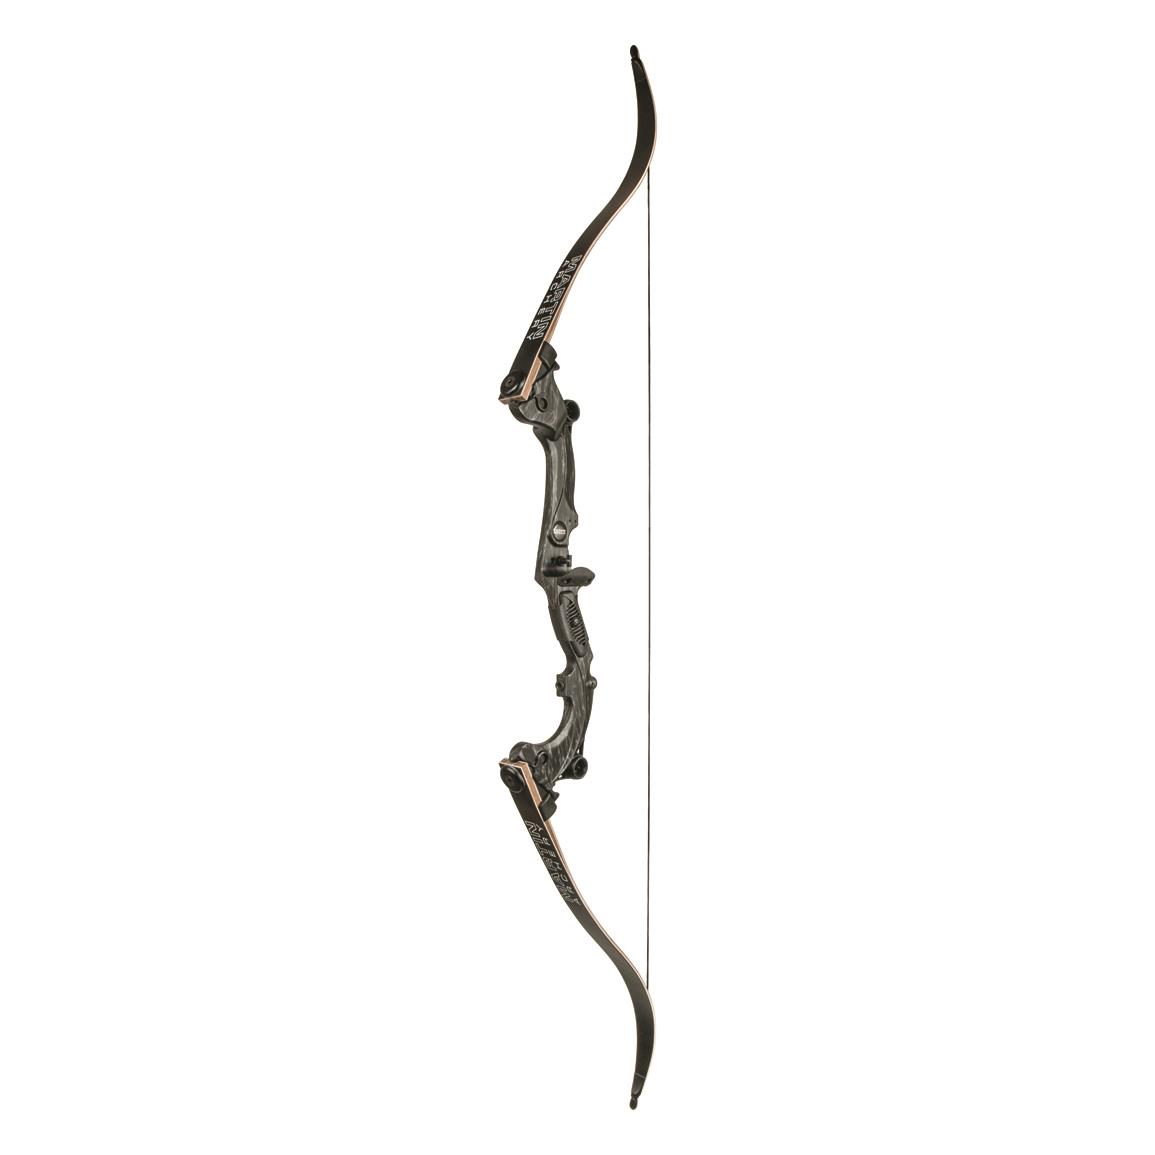 Martin Archery Saber TakeDown Bow, 35 lb., Right Handed